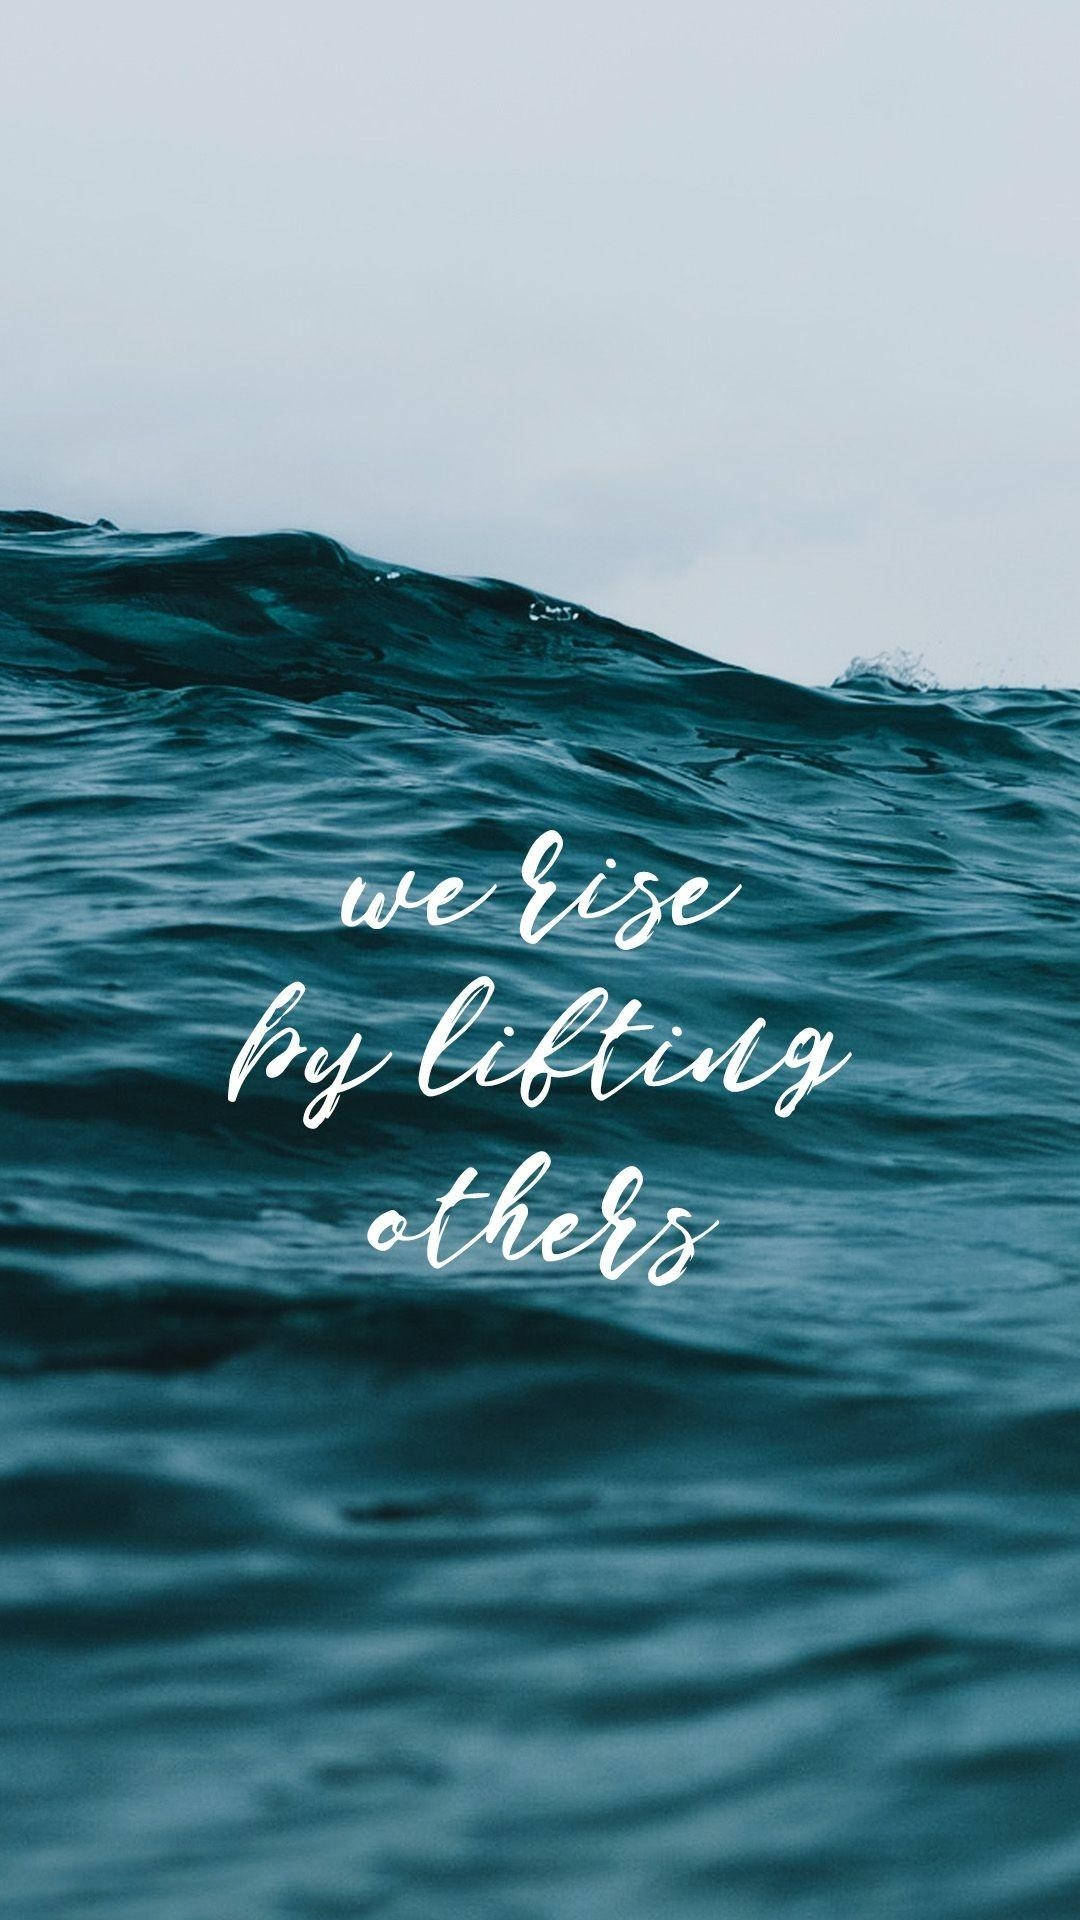 Inspiring Quotes Phone Lift Others Wallpaper